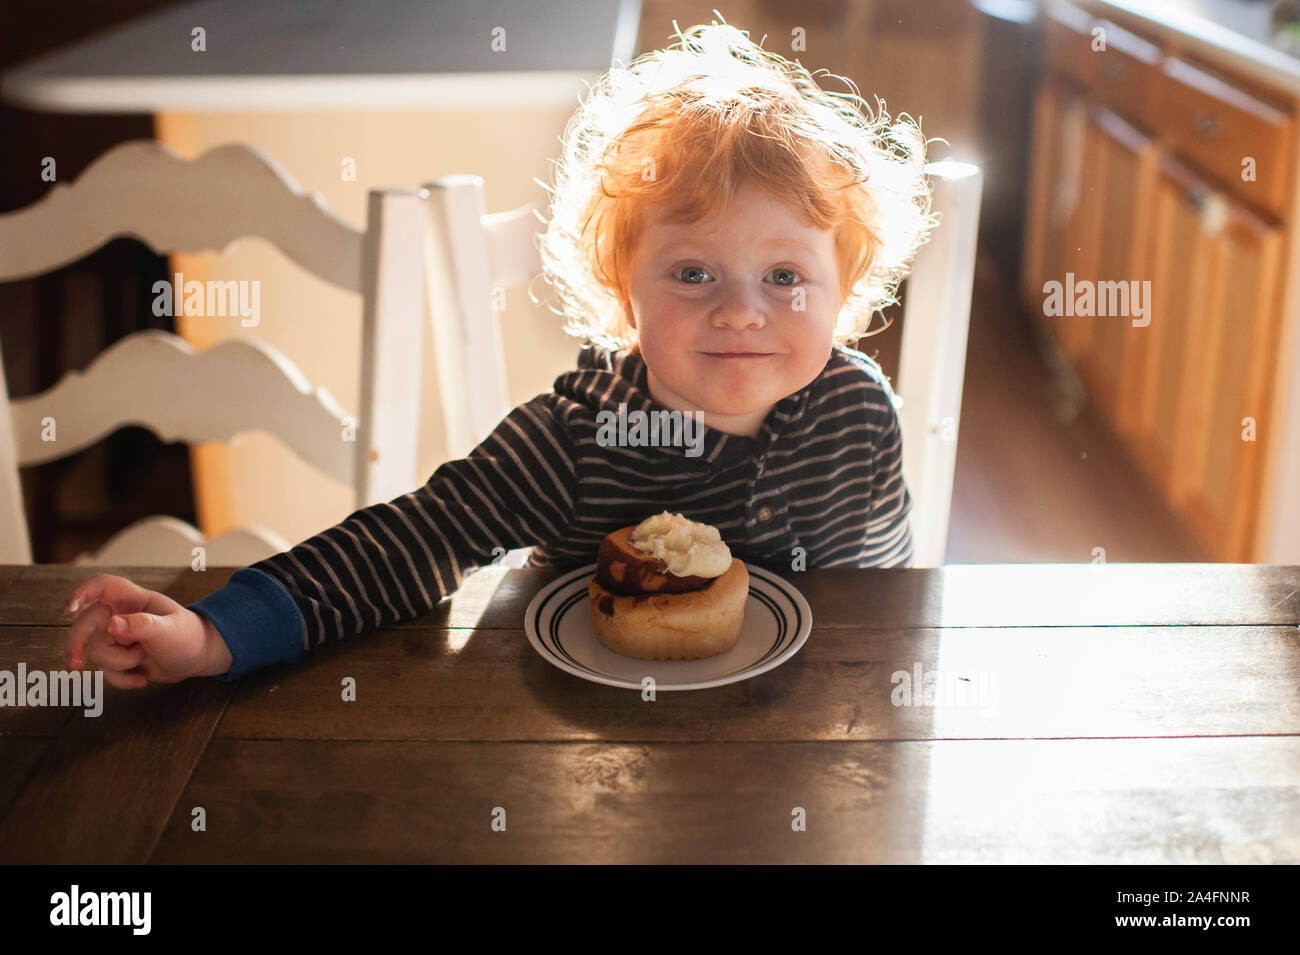 Toddler boy sitting at table enjoying a cinnamon roll at home Stock Photo